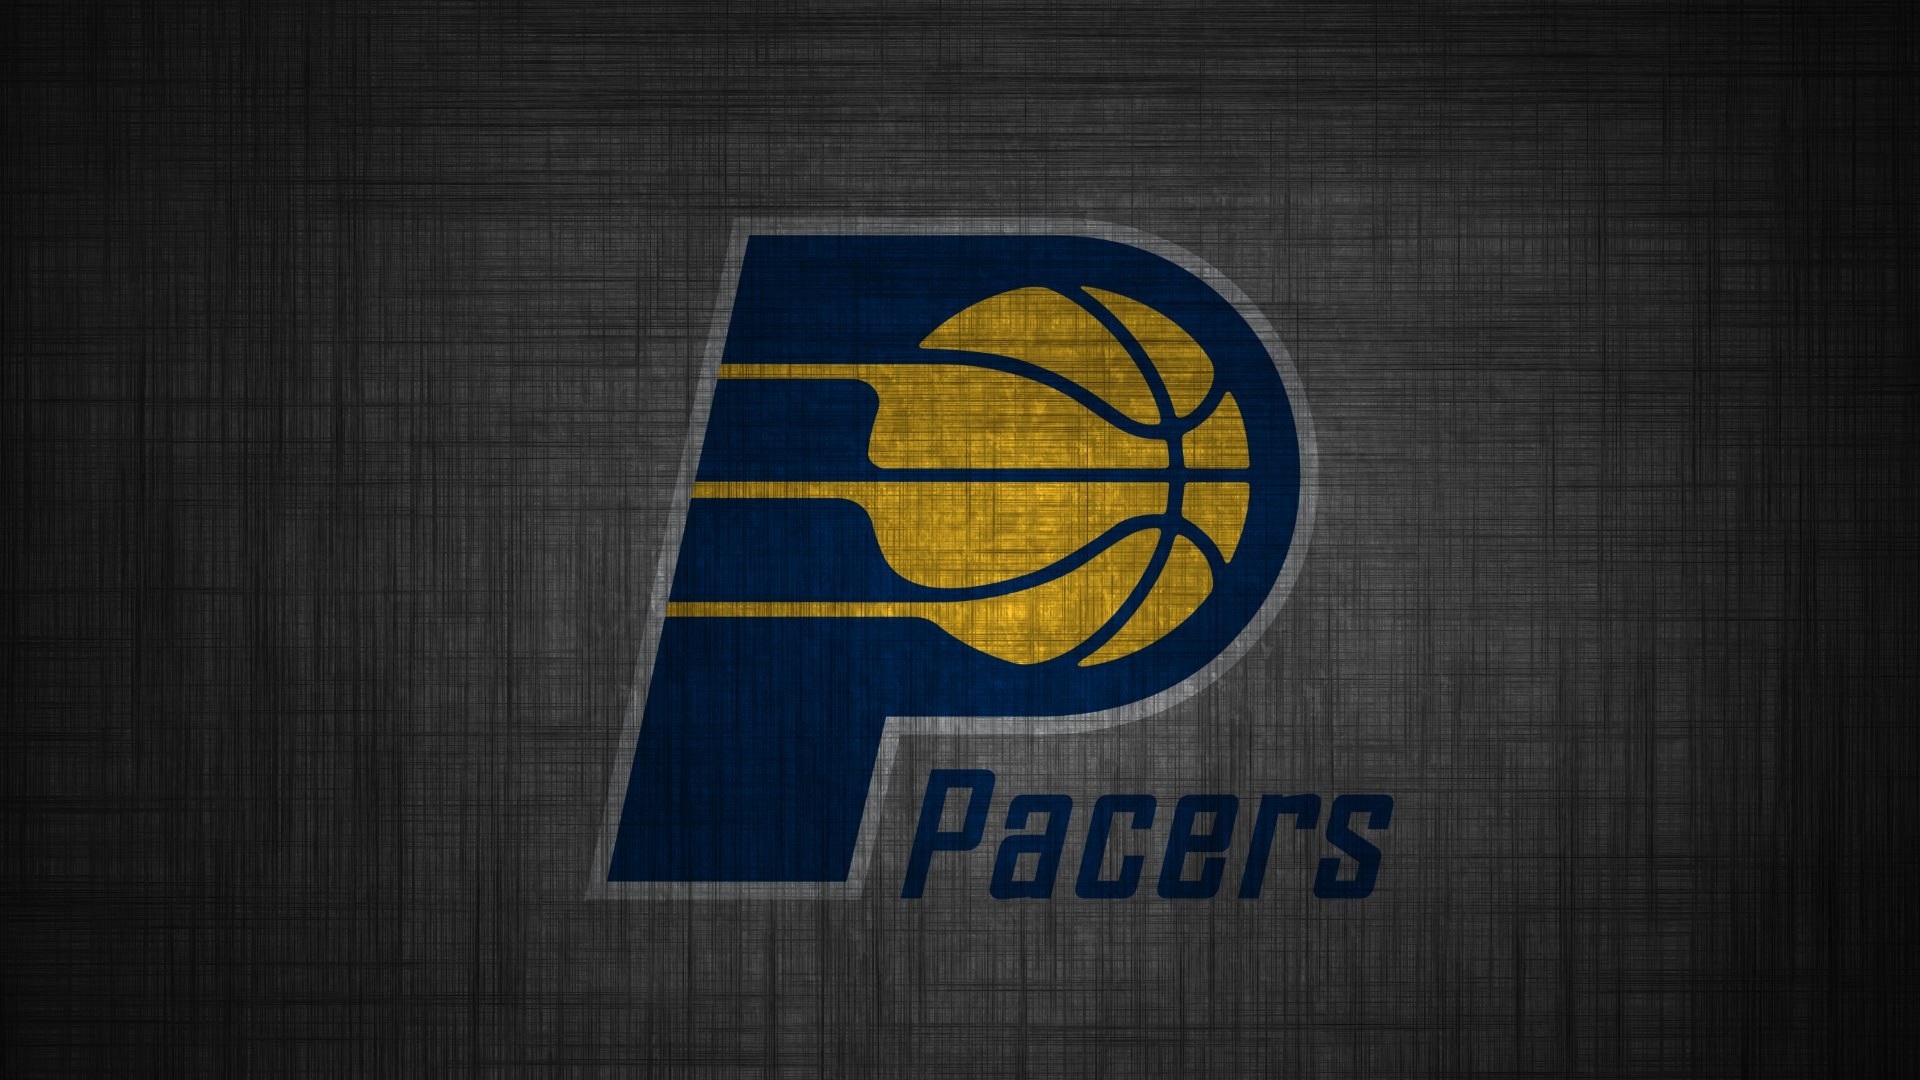 Indiana Pacers Wallpaper For Mac Backgrounds with high-resolution 1920x1080 pixel. You can use this wallpaper for your Desktop Computer Backgrounds, Windows or Mac Screensavers, iPhone Lock screen, Tablet or Android and another Mobile Phone device